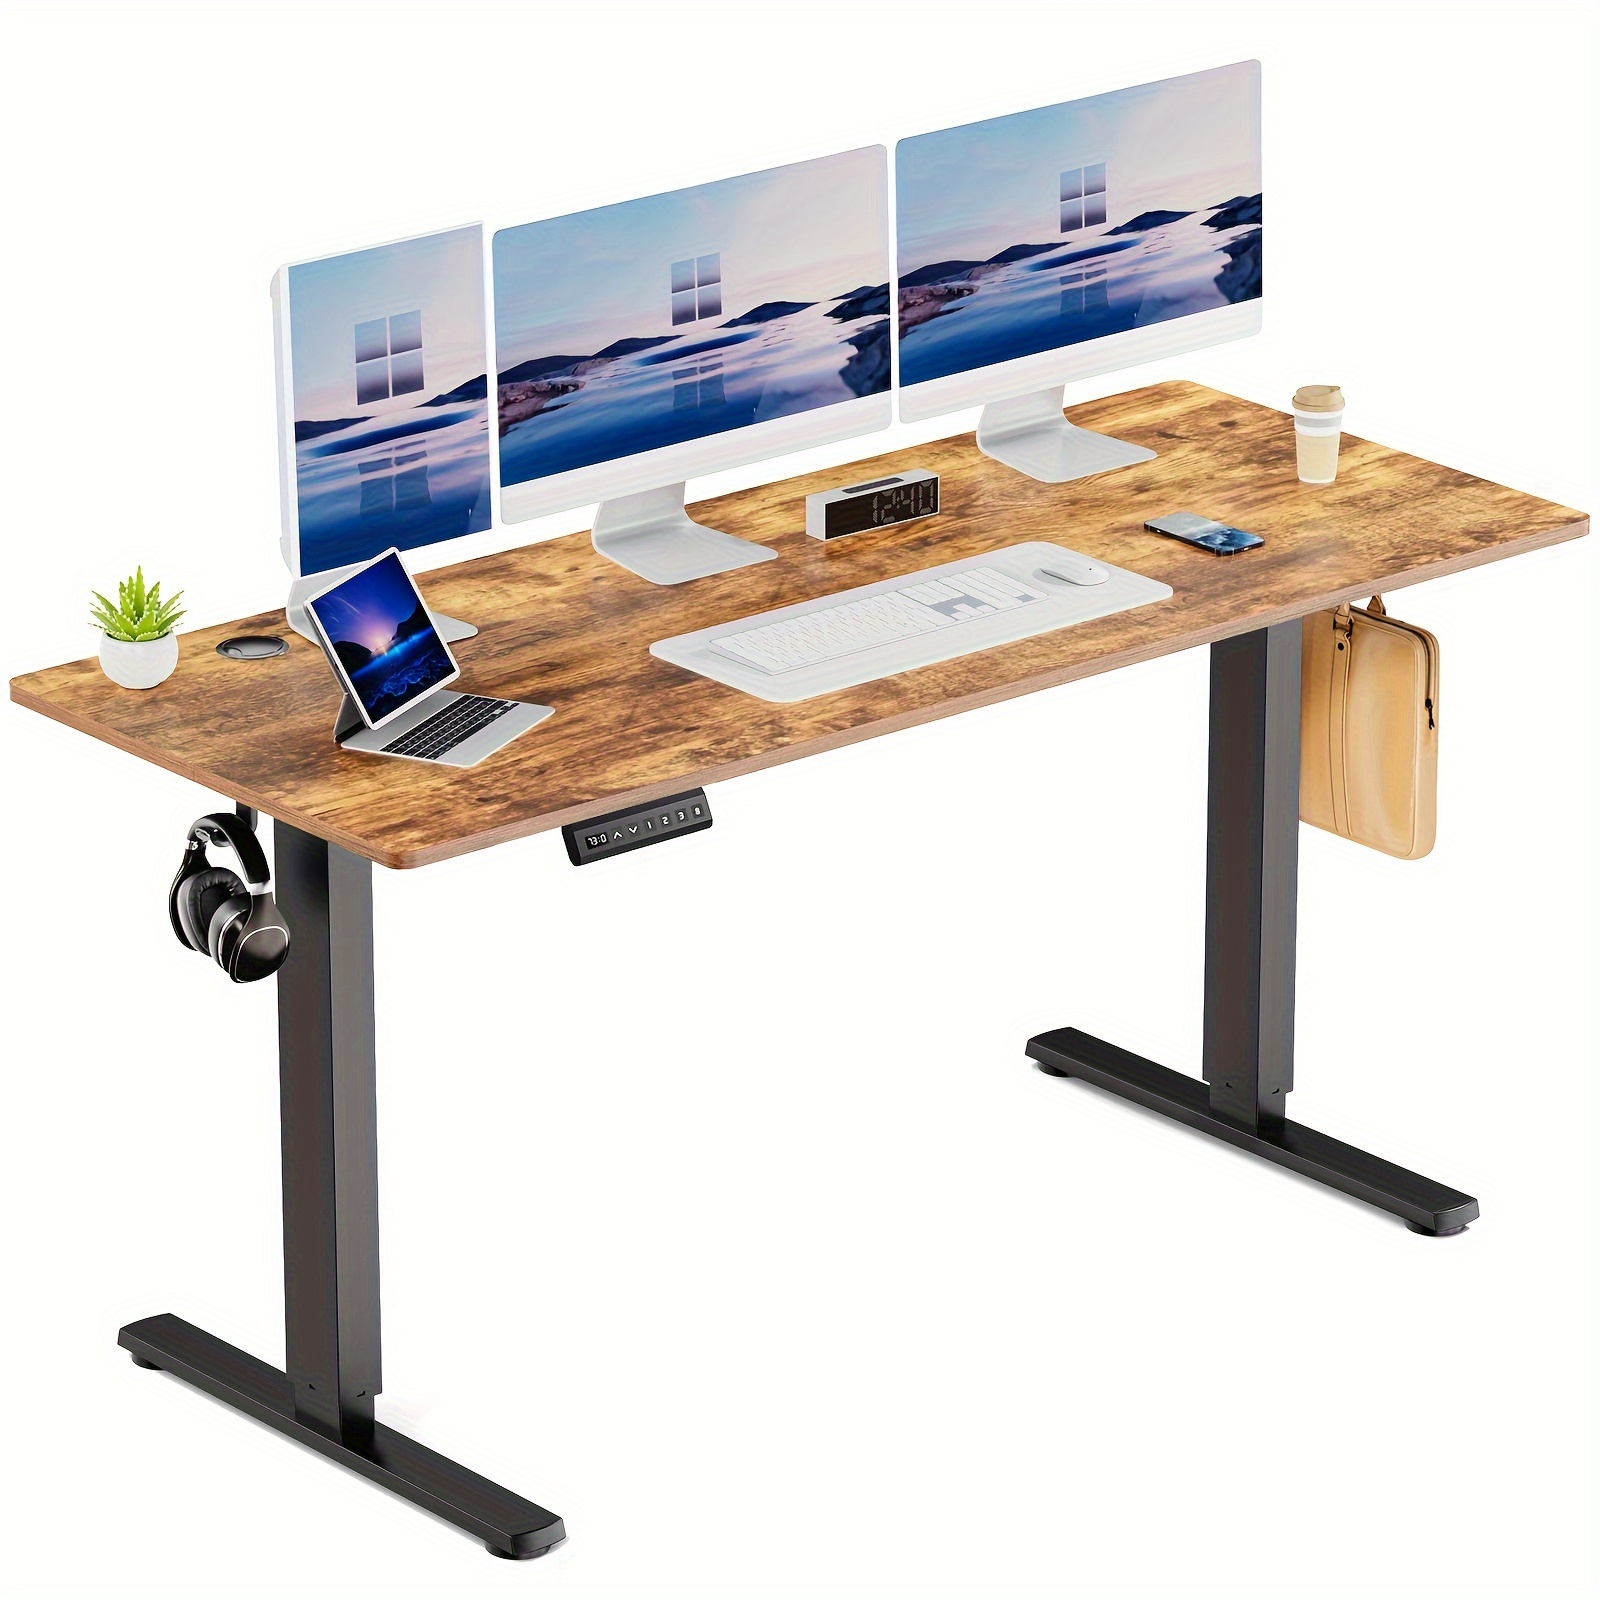 

63 Inch Electric Standing Office Desk Height Adjustable Sit Stand Up Pc Workstation Wood Computer Work Table For Home Bedroom Gaming Room Small Spaces